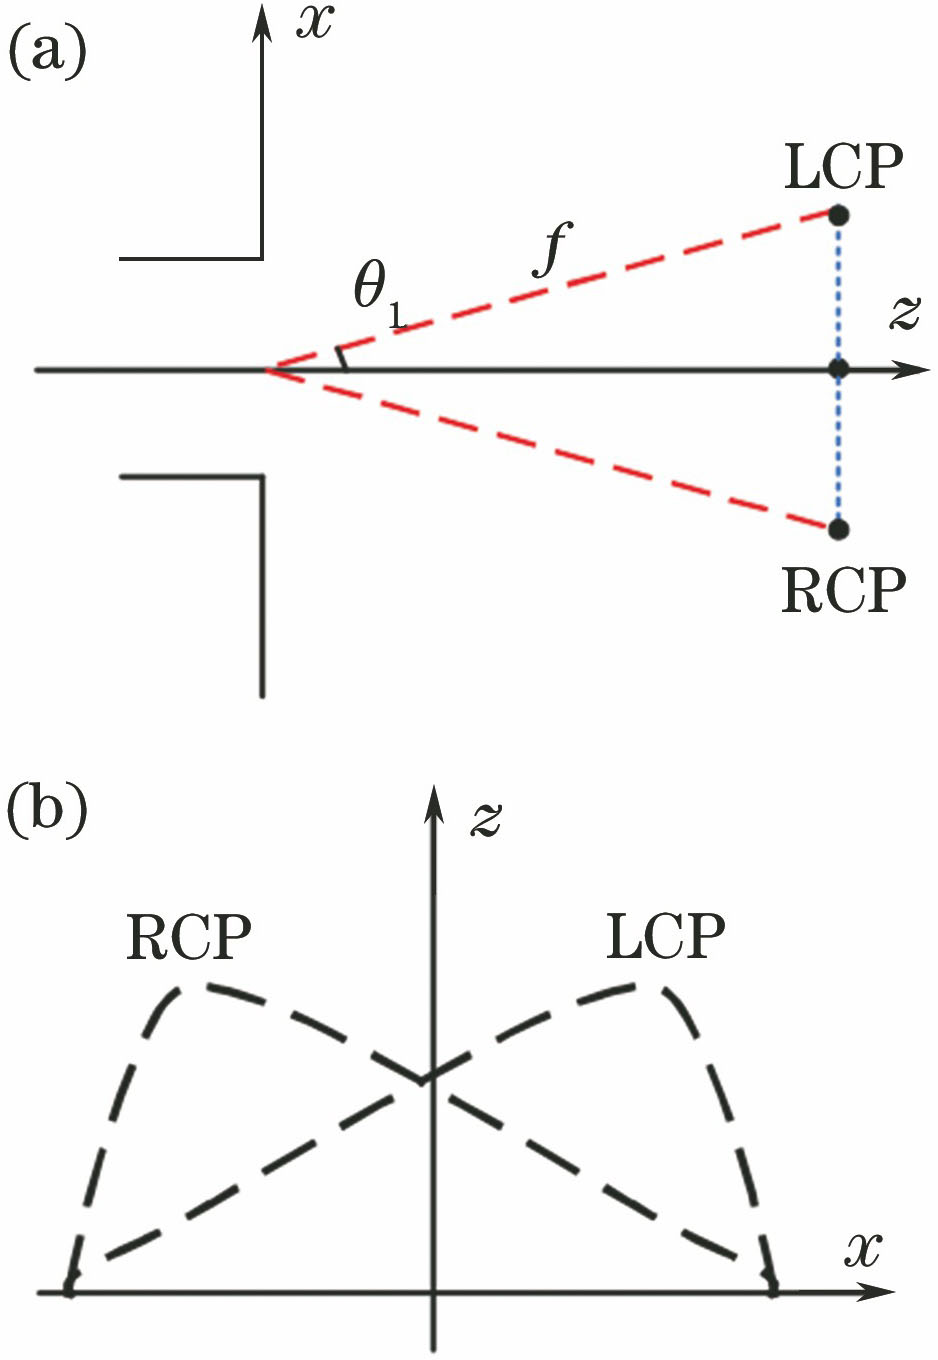 Schematic of metalens focusing and phase. (a) Focal position; (b) target phase